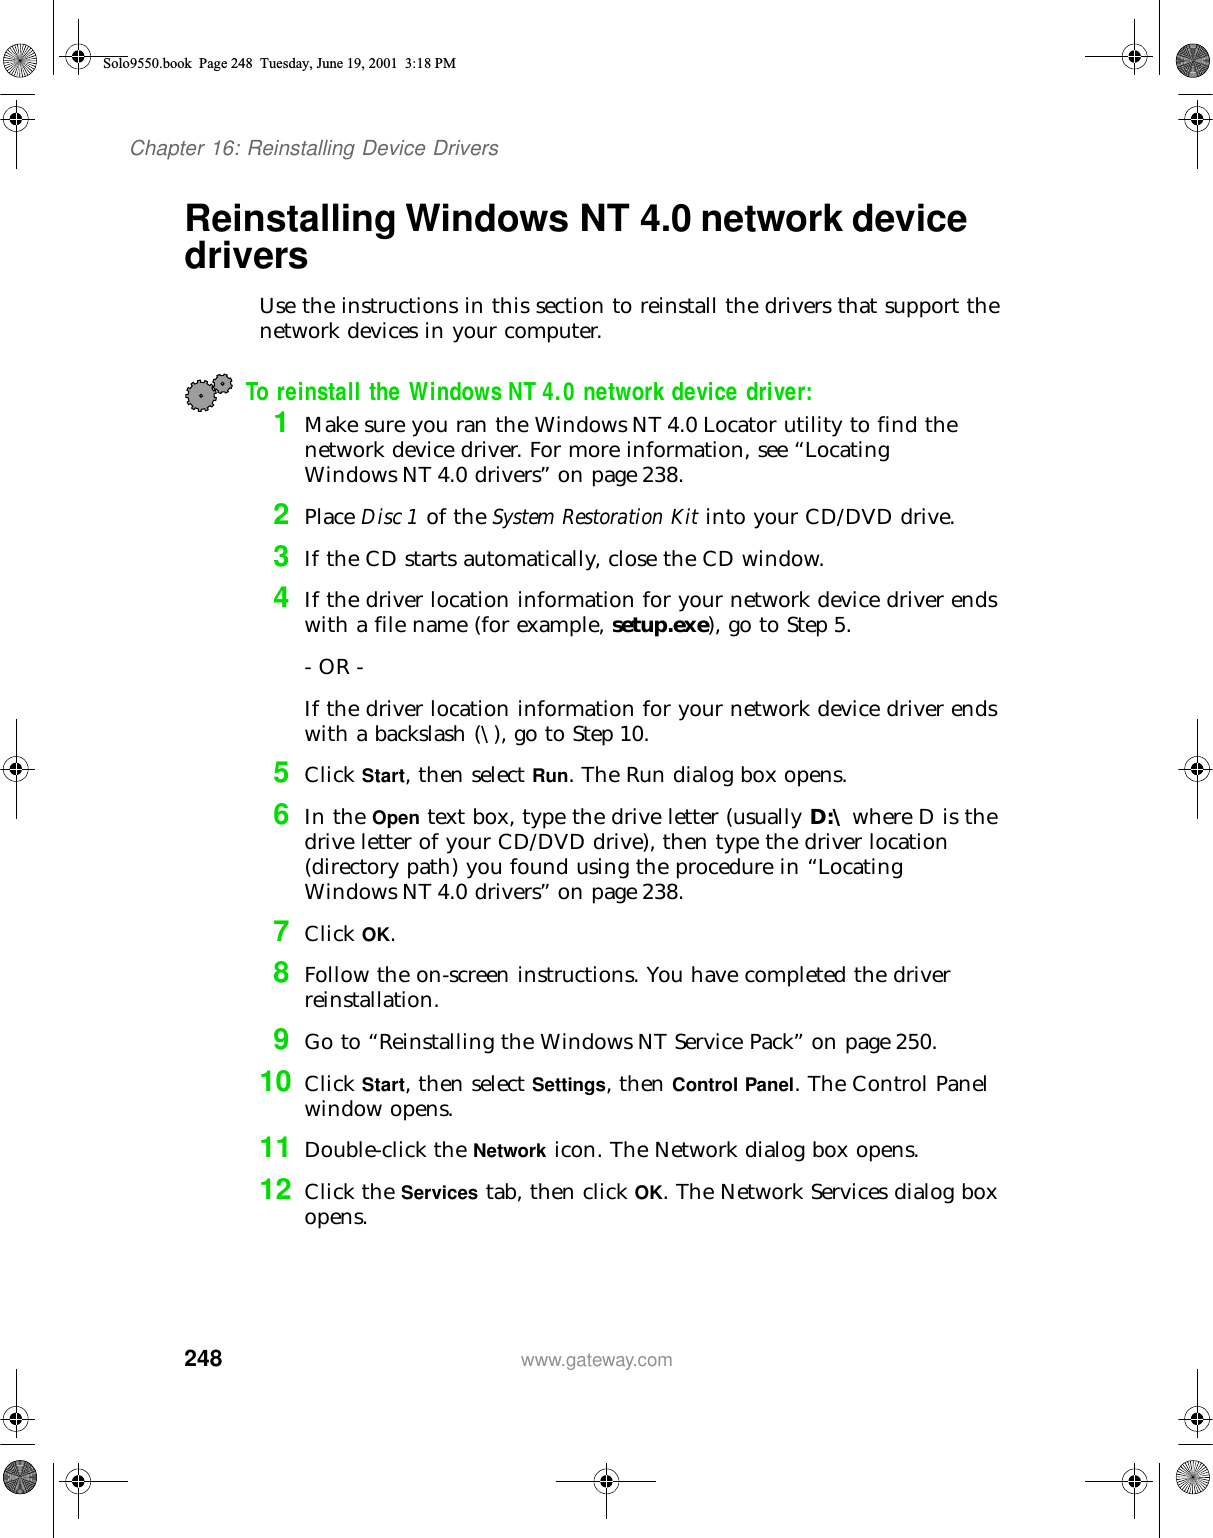 248Chapter 16: Reinstalling Device Driverswww.gateway.comReinstalling Windows NT 4.0 network device driversUse the instructions in this section to reinstall the drivers that support the network devices in your computer.To reinstall the Windows NT 4.0 network device driver:1Make sure you ran the Windows NT 4.0 Locator utility to find the network device driver. For more information, see “Locating Windows NT 4.0 drivers” on page 238.2Place Disc 1 of the System Restoration Kit into your CD/DVD drive.3If the CD starts automatically, close the CD window.4If the driver location information for your network device driver ends with a file name (for example, setup.exe), go to Step 5.- OR -If the driver location information for your network device driver ends with a backslash (\), go to Step 10.5Click Start, then select Run. The Run dialog box opens.6In the Open text box, type the drive letter (usually D:\ where D is the drive letter of your CD/DVD drive), then type the driver location (directory path) you found using the procedure in “Locating Windows NT 4.0 drivers” on page 238.7Click OK.8Follow the on-screen instructions. You have completed the driver reinstallation.9Go to “Reinstalling the Windows NT Service Pack” on page 250.10 Click Start, then select Settings, then Control Panel. The Control Panel window opens.11 Double-click the Network icon. The Network dialog box opens.12 Click the Services tab, then click OK. The Network Services dialog box opens.Solo9550.book Page 248 Tuesday, June 19, 2001 3:18 PM